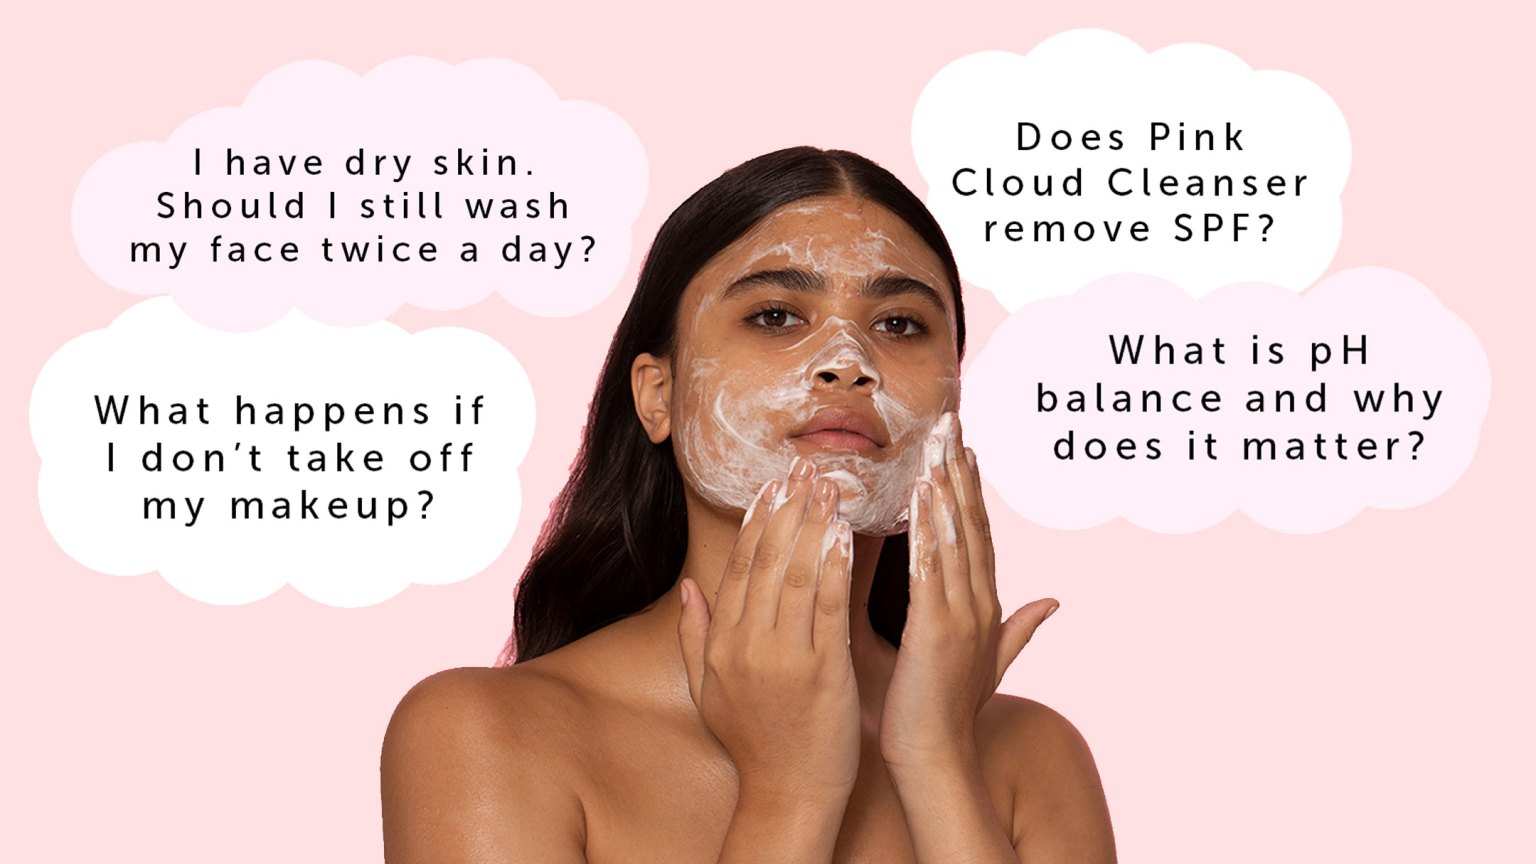 How Often Should I Wash my Face? And Other Cleansing Questions